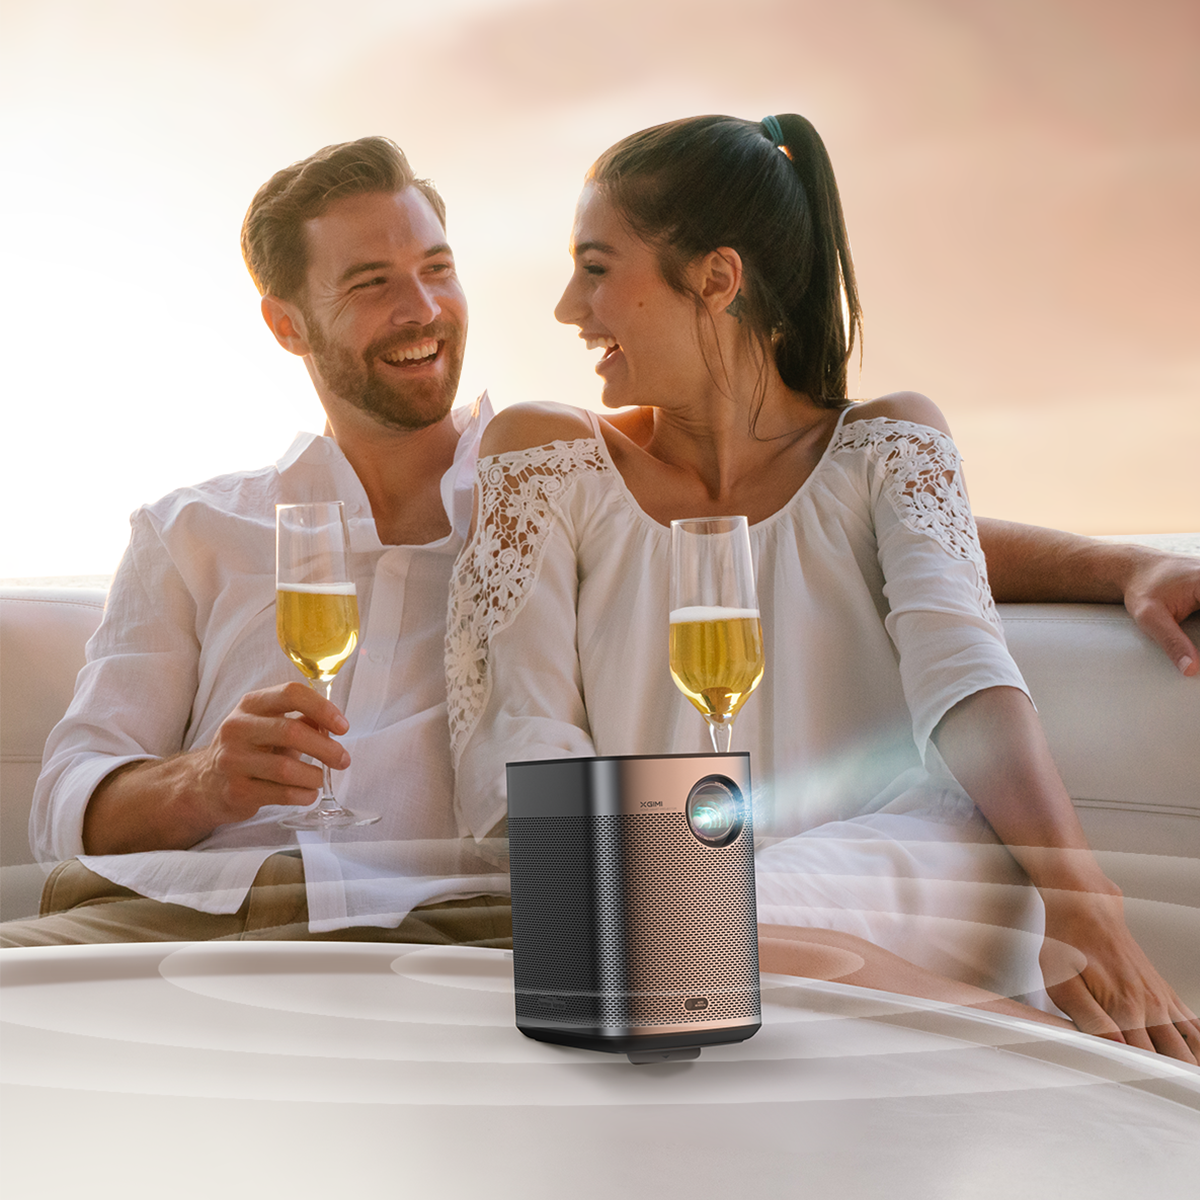 Creating Unforgettable Valentine's Day
Memories With Smart Projectors